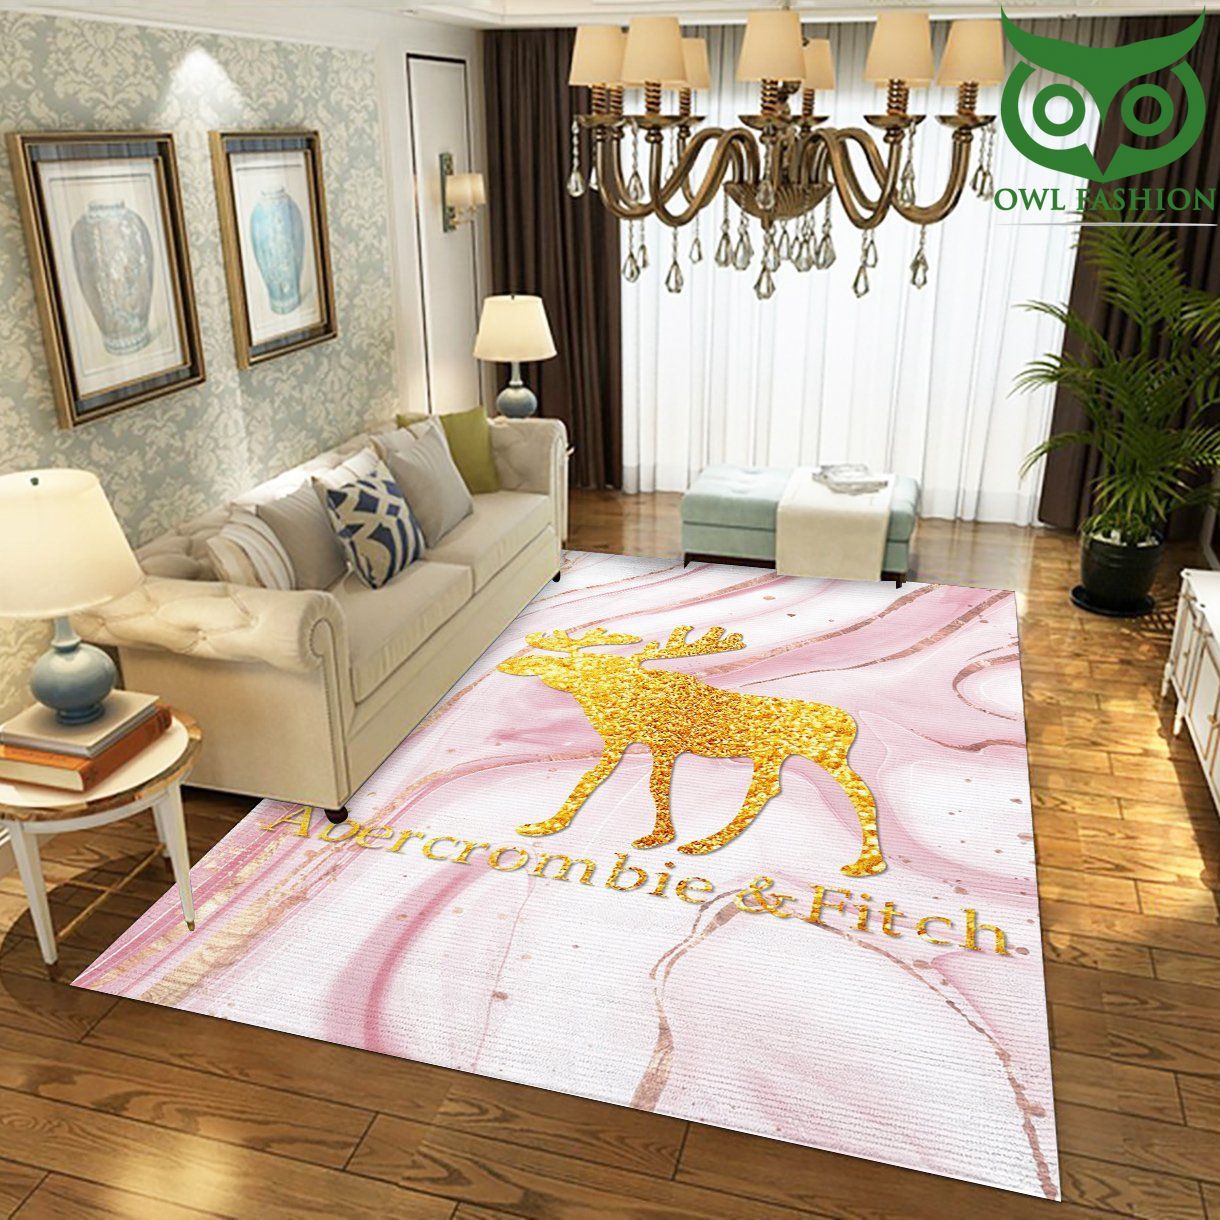 Abercombie And Fitch Fashion Brand home and floor decor carpet rug 